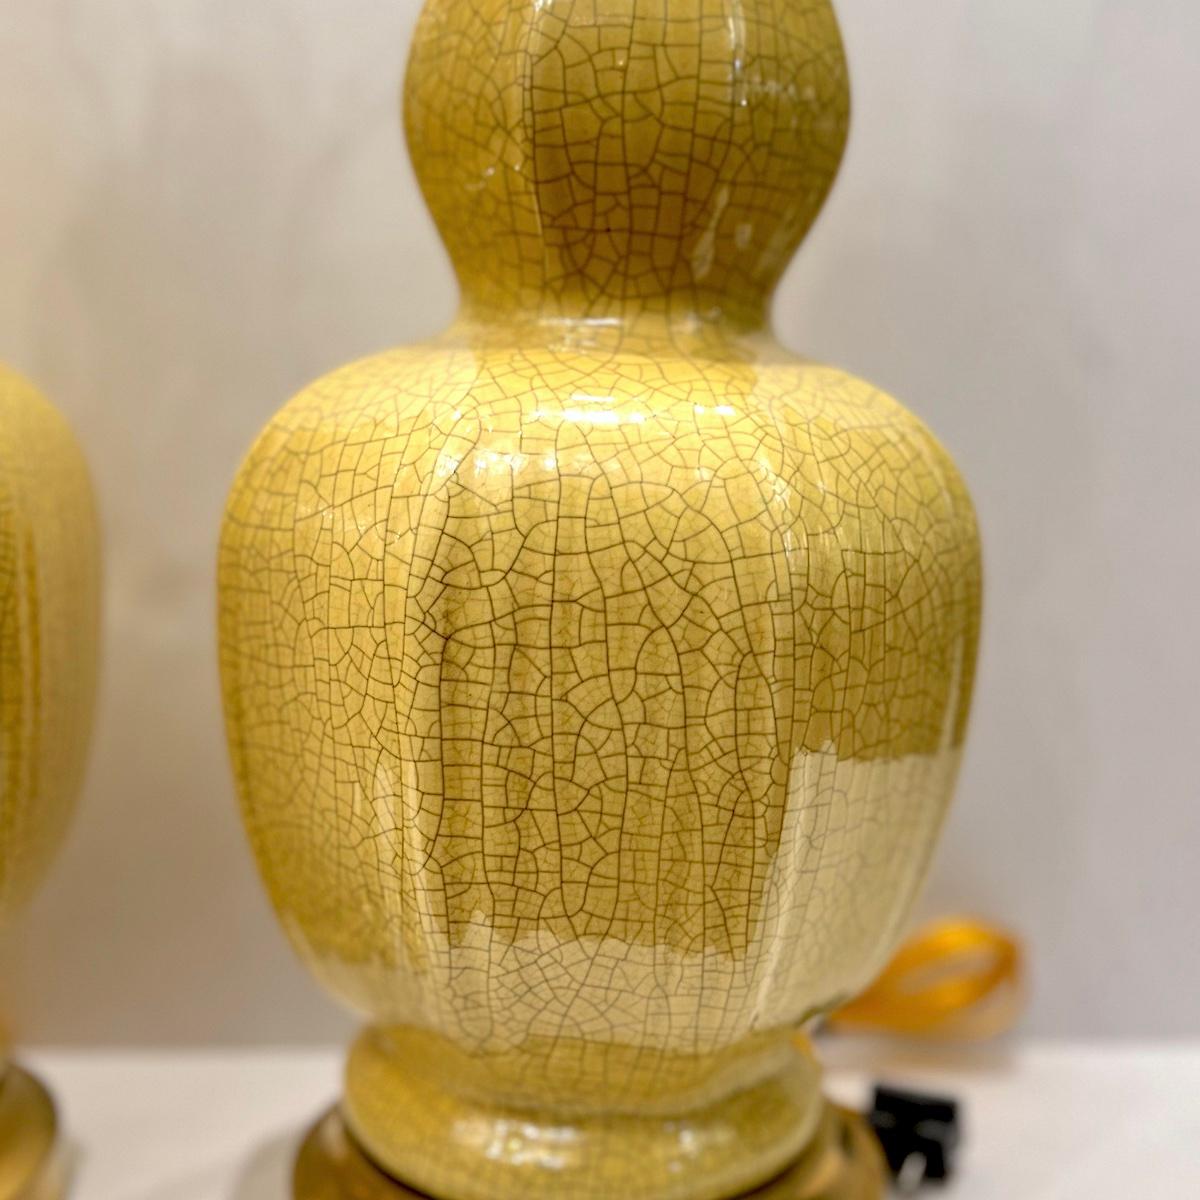 Pair of Yellow Porcelain Lamps In Good Condition For Sale In New York, NY